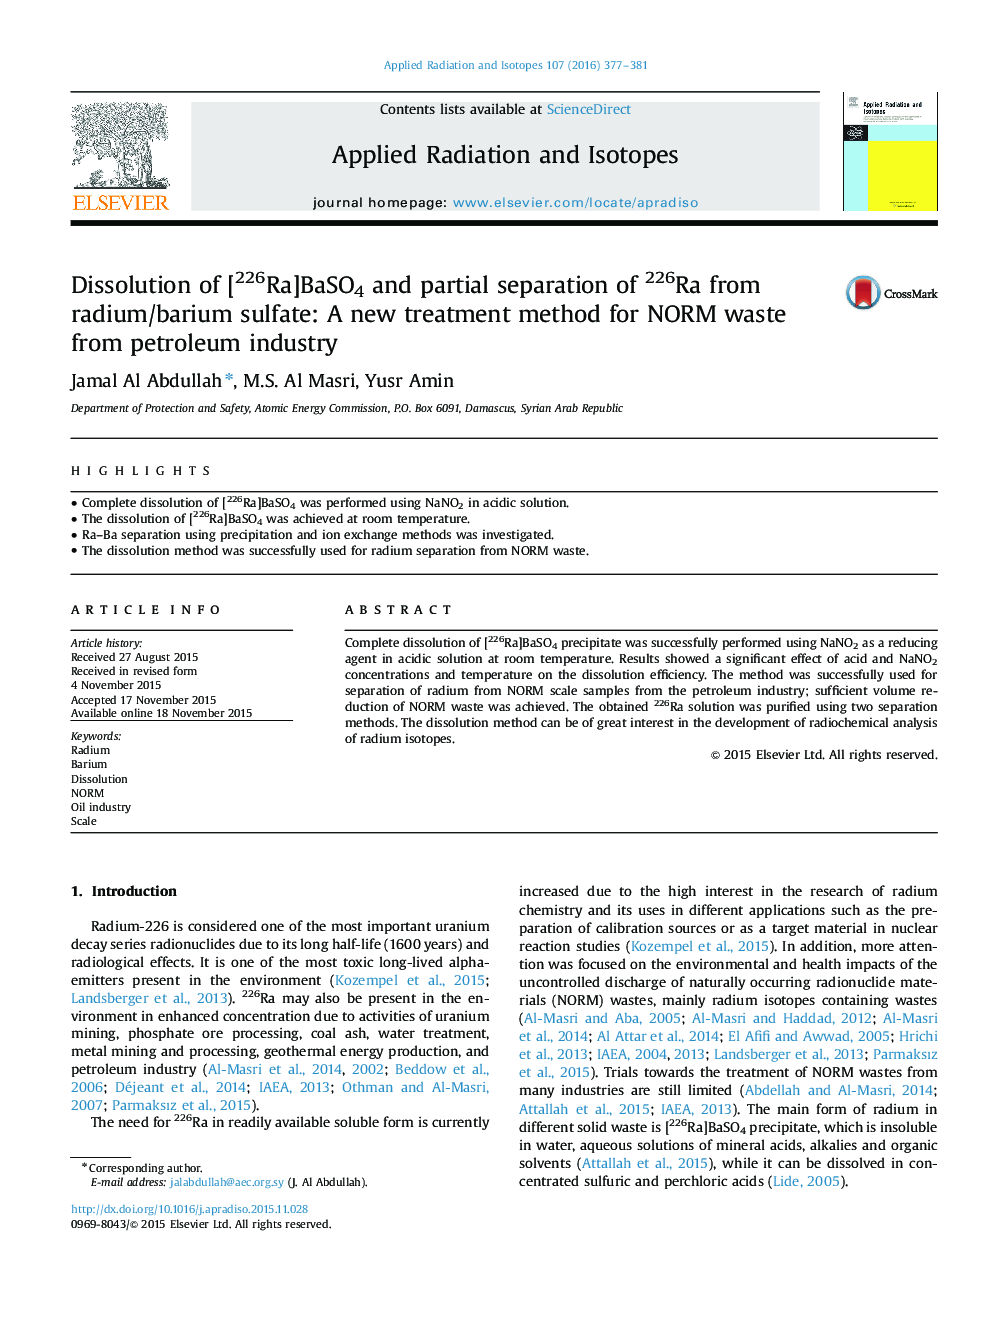 Dissolution of [226Ra]BaSO4 and partial separation of 226Ra from radium/barium sulfate: A new treatment method for NORM waste from petroleum industry